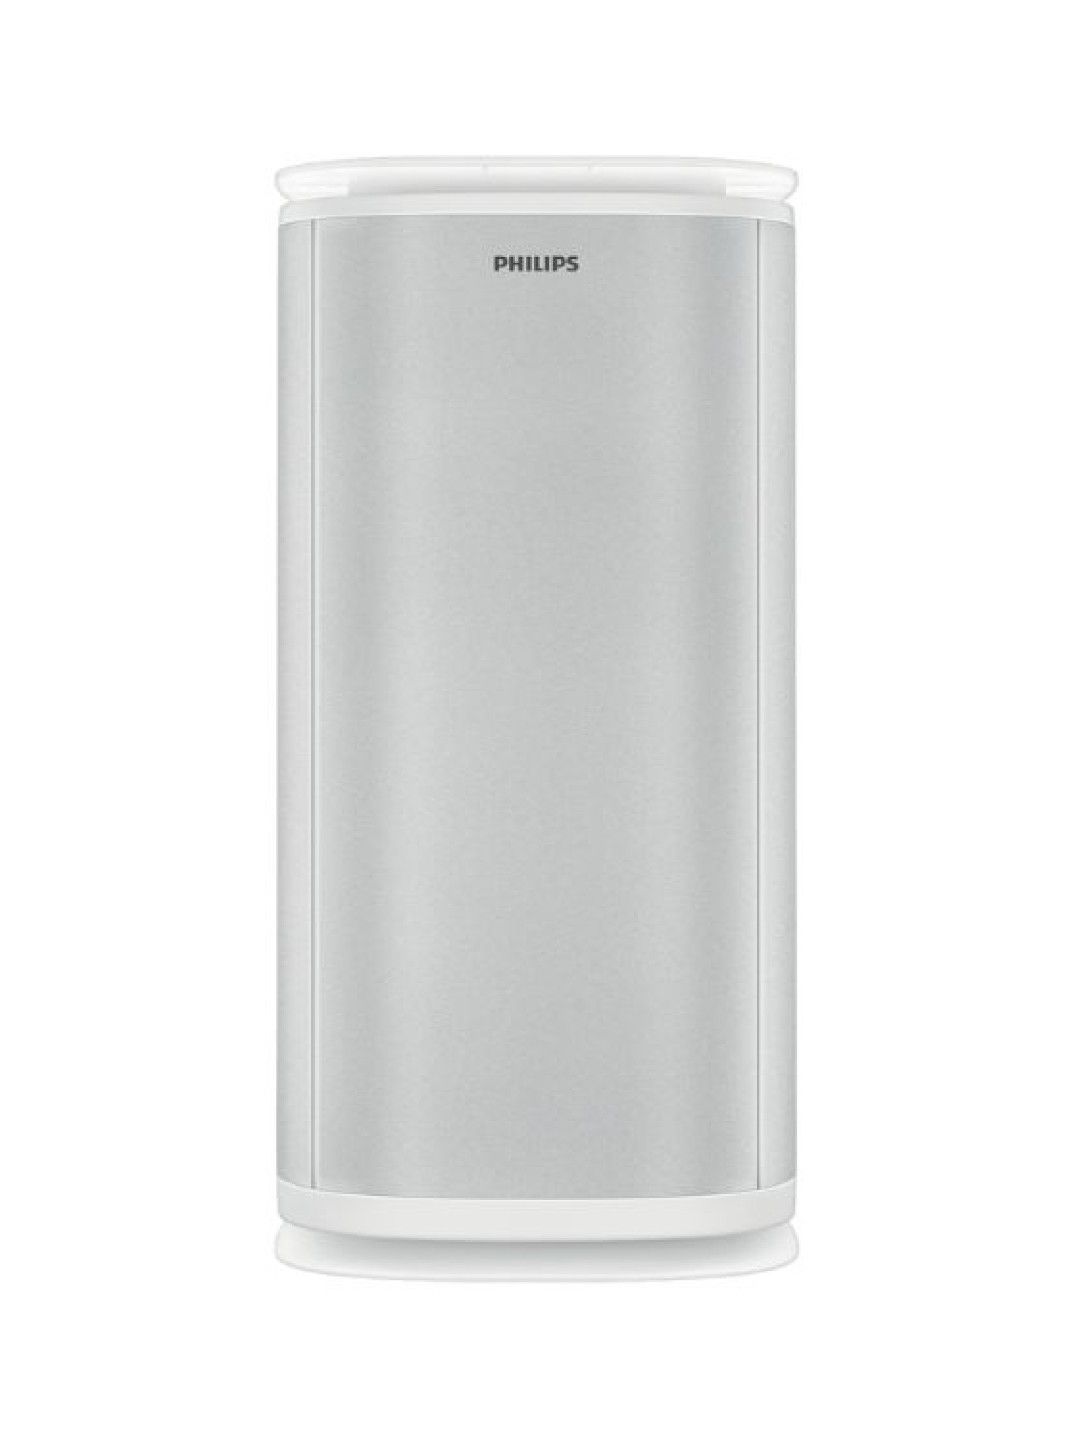 Philips UV-C Disinfection Air Cleaner